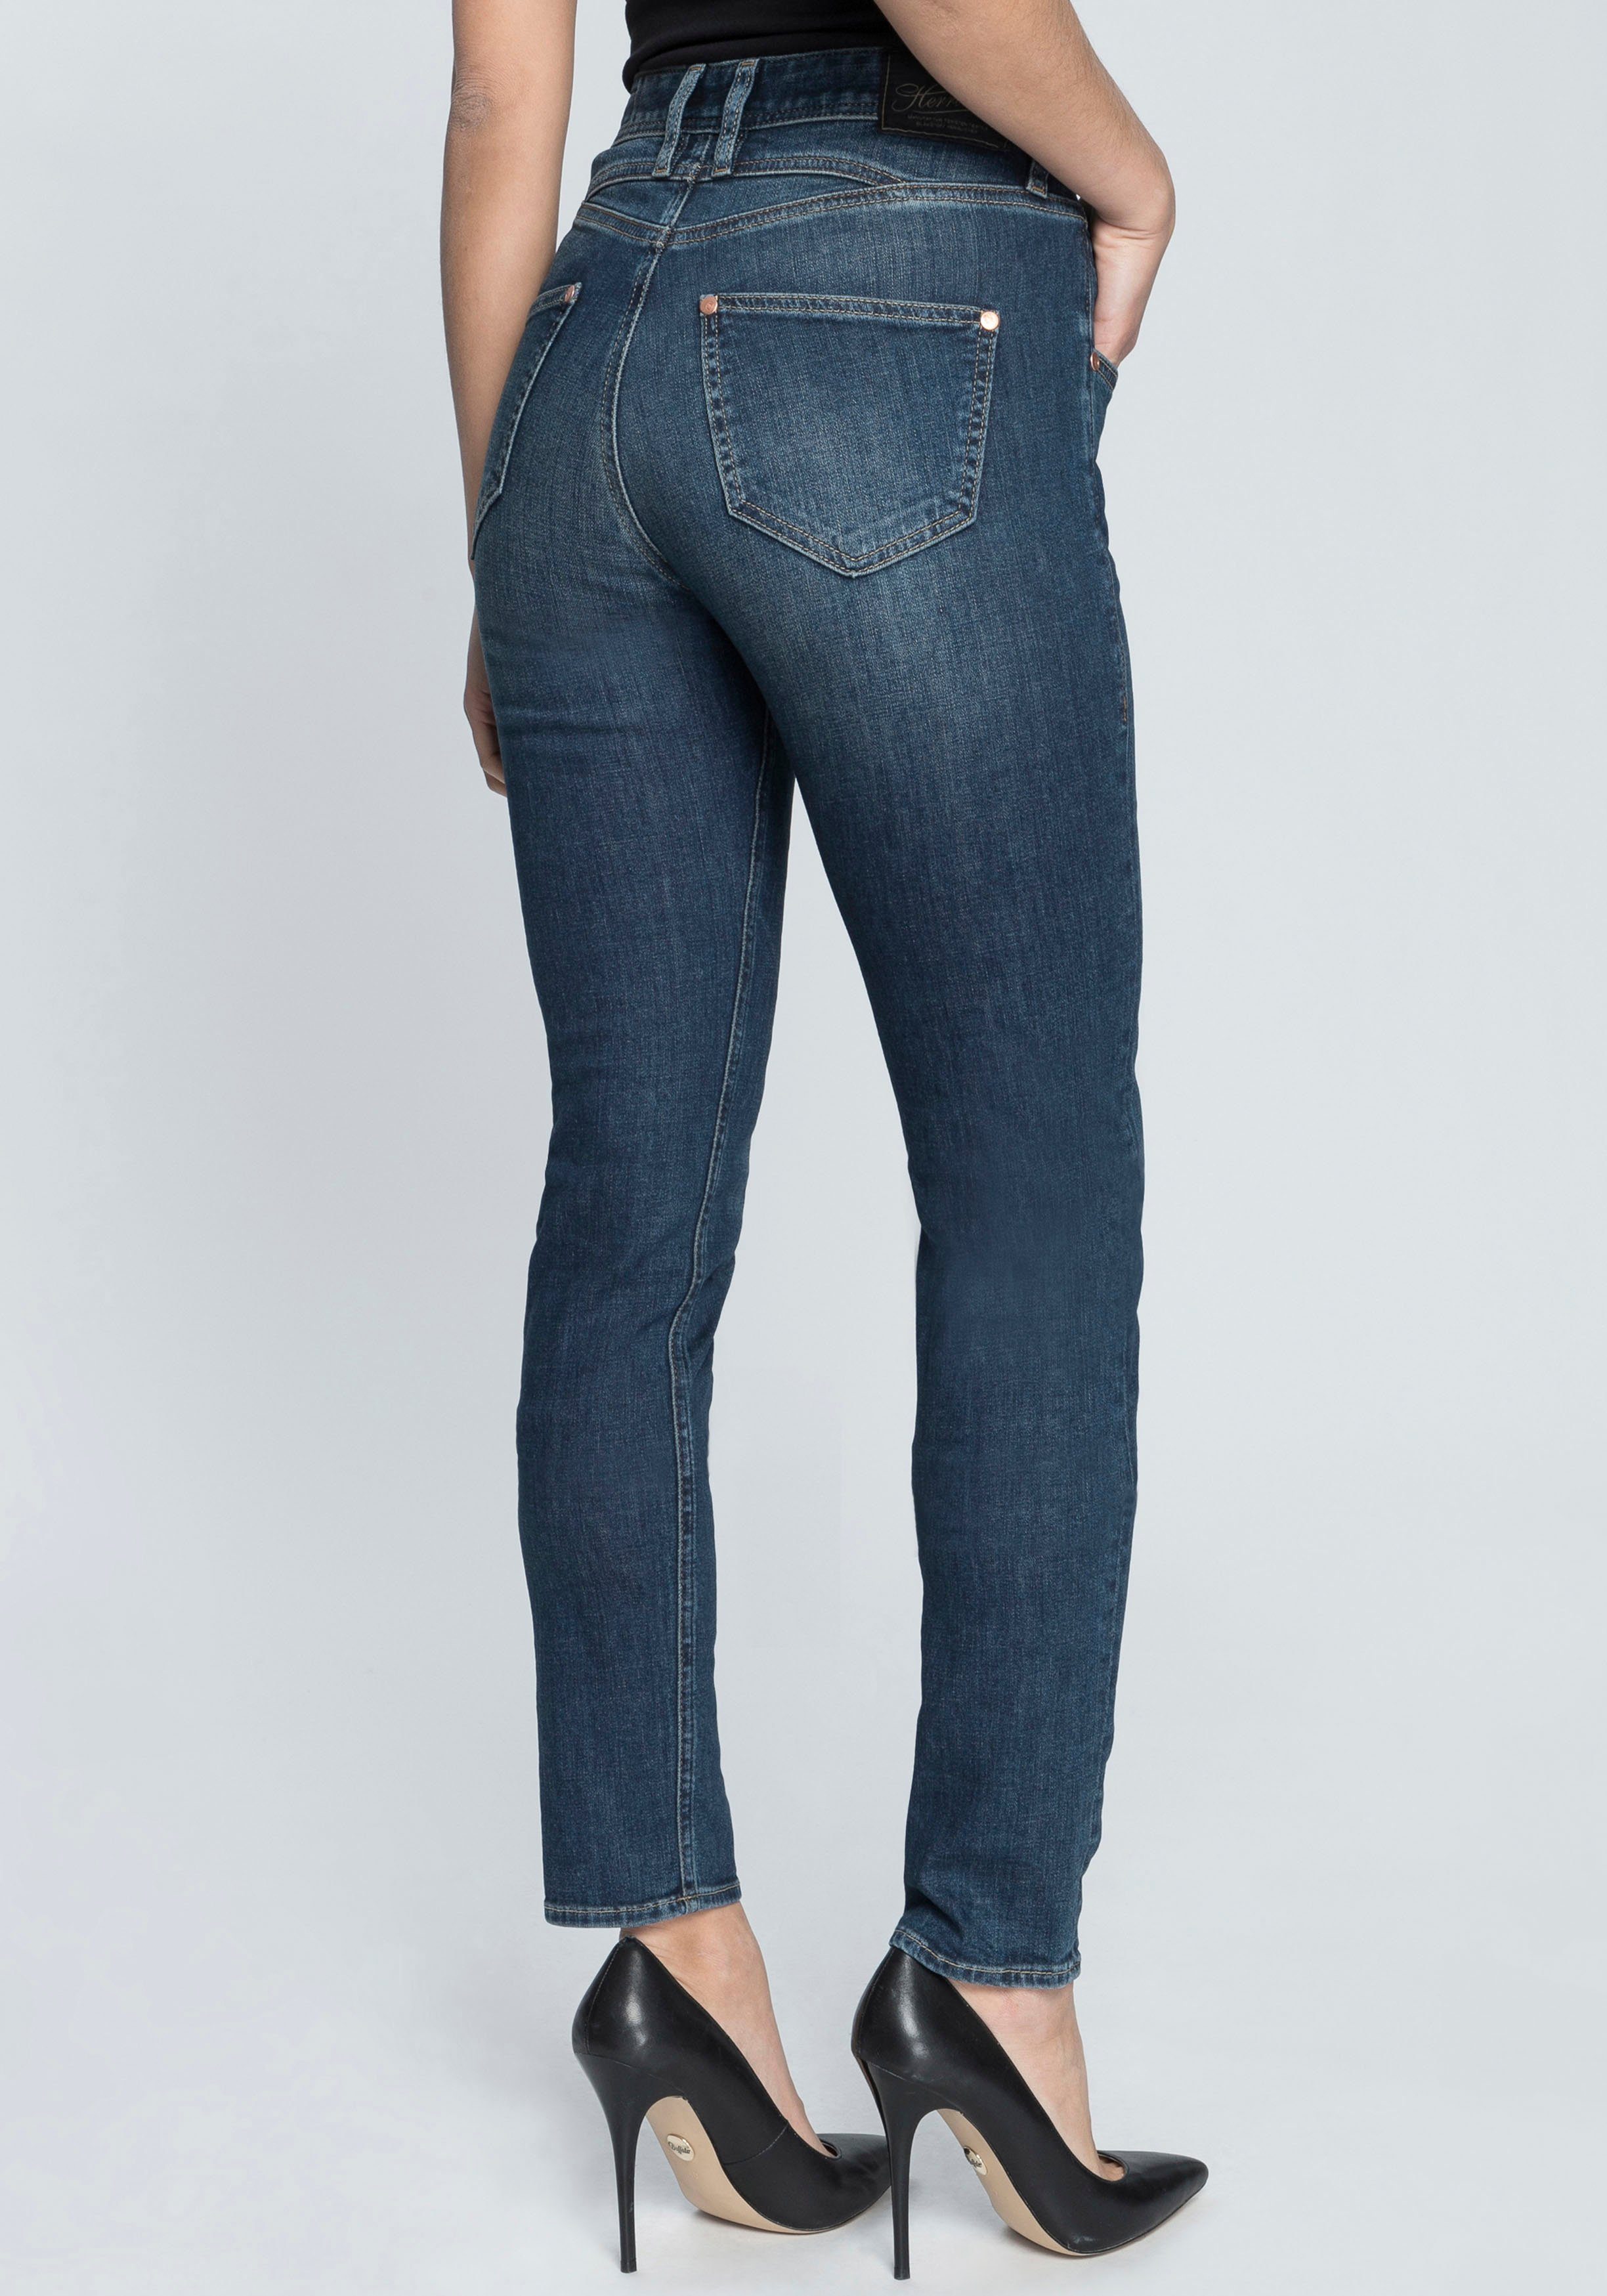 Normal Polyester Slim-fit-Jeans RECYCLED Recycled Herrlicher used Waist SLIM PEPPY 034 DENIM